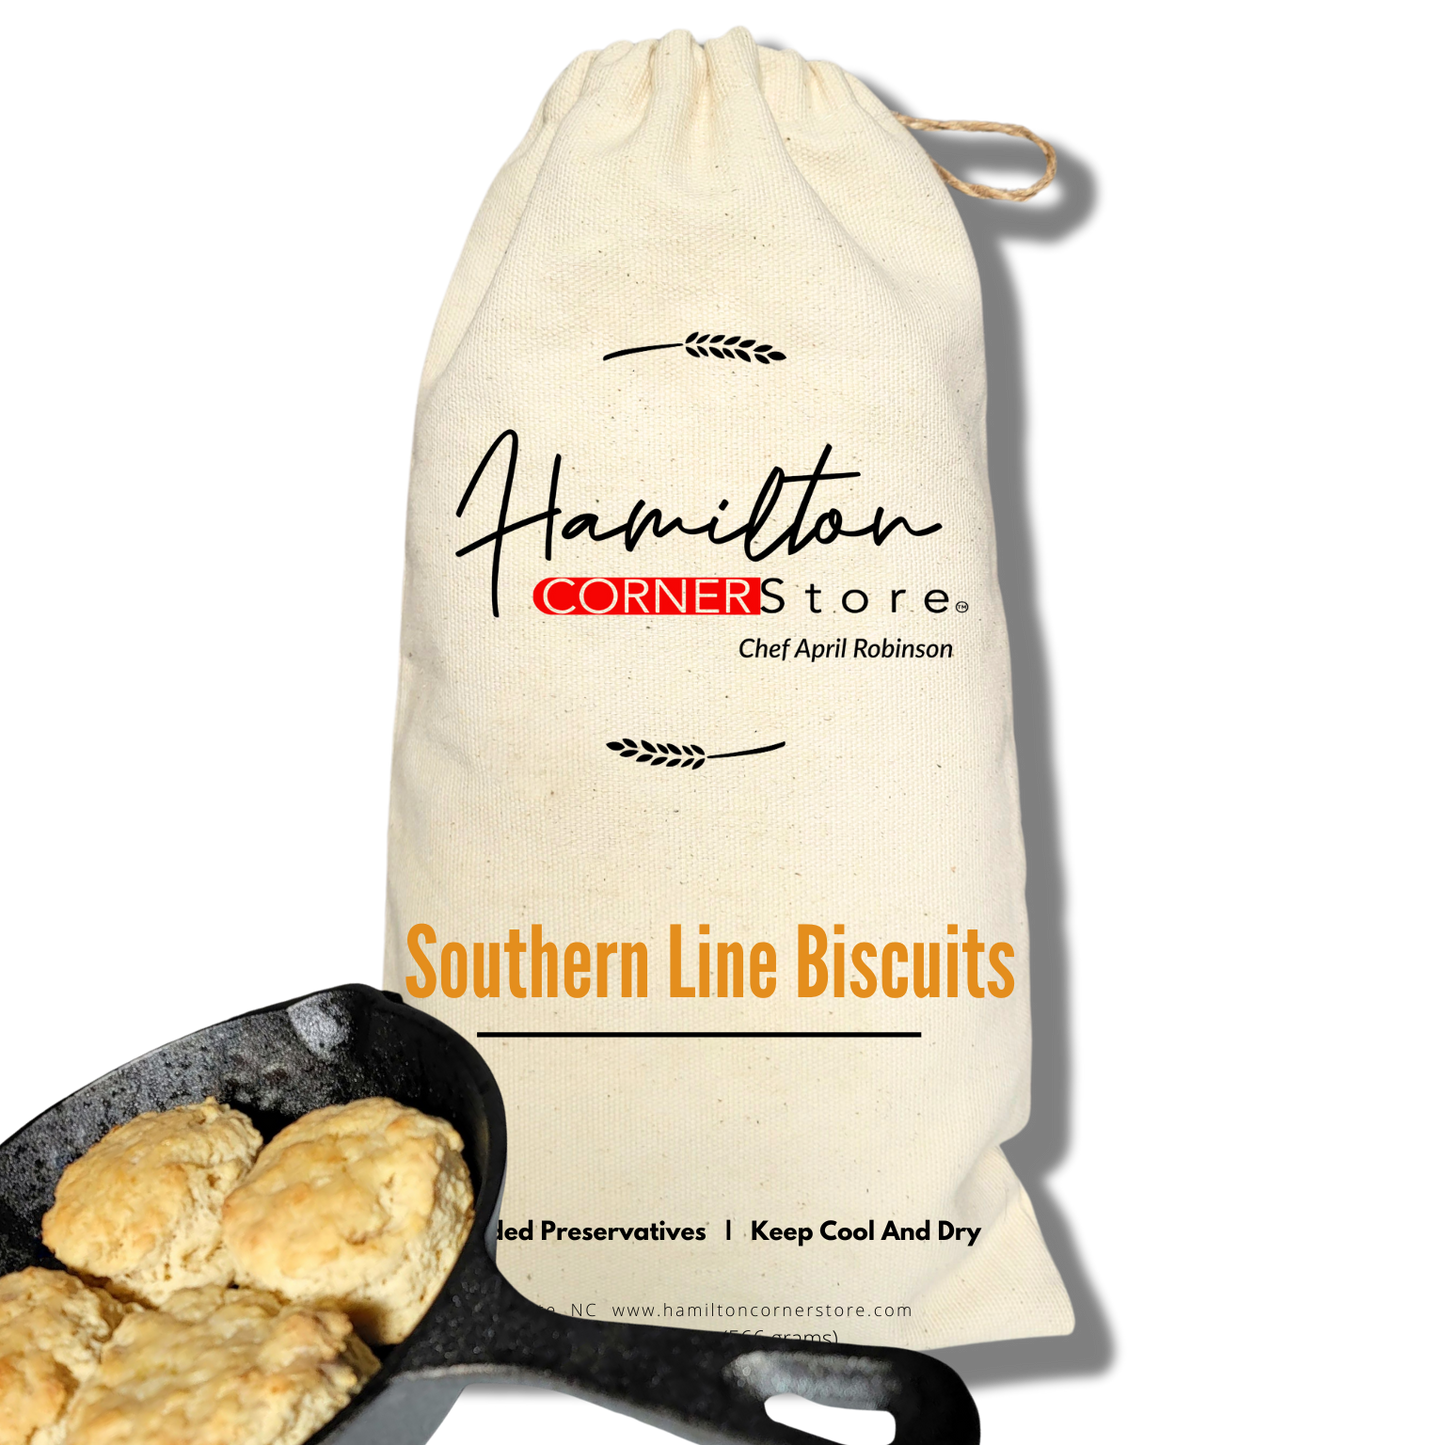 southern line biscuits and cast iron skillet